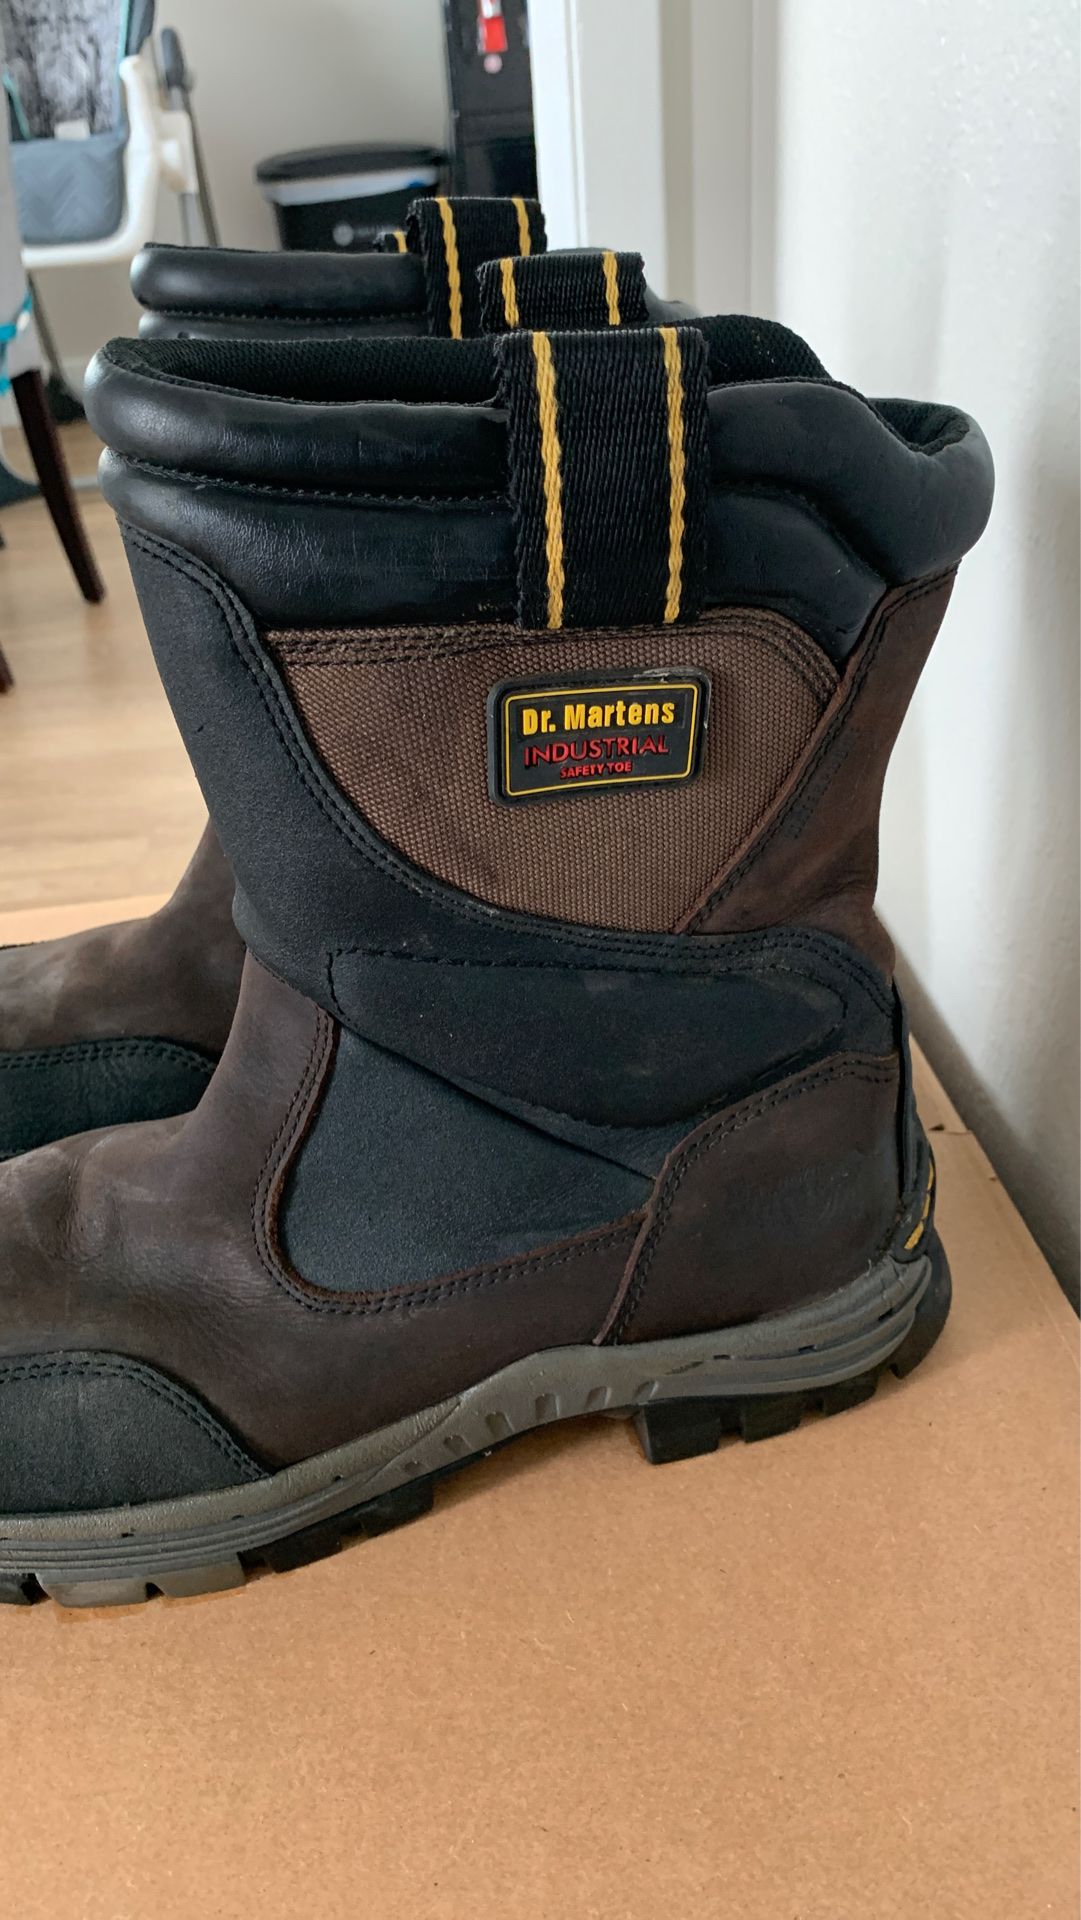 Size 11 - Dr Martens work boots - safety toe